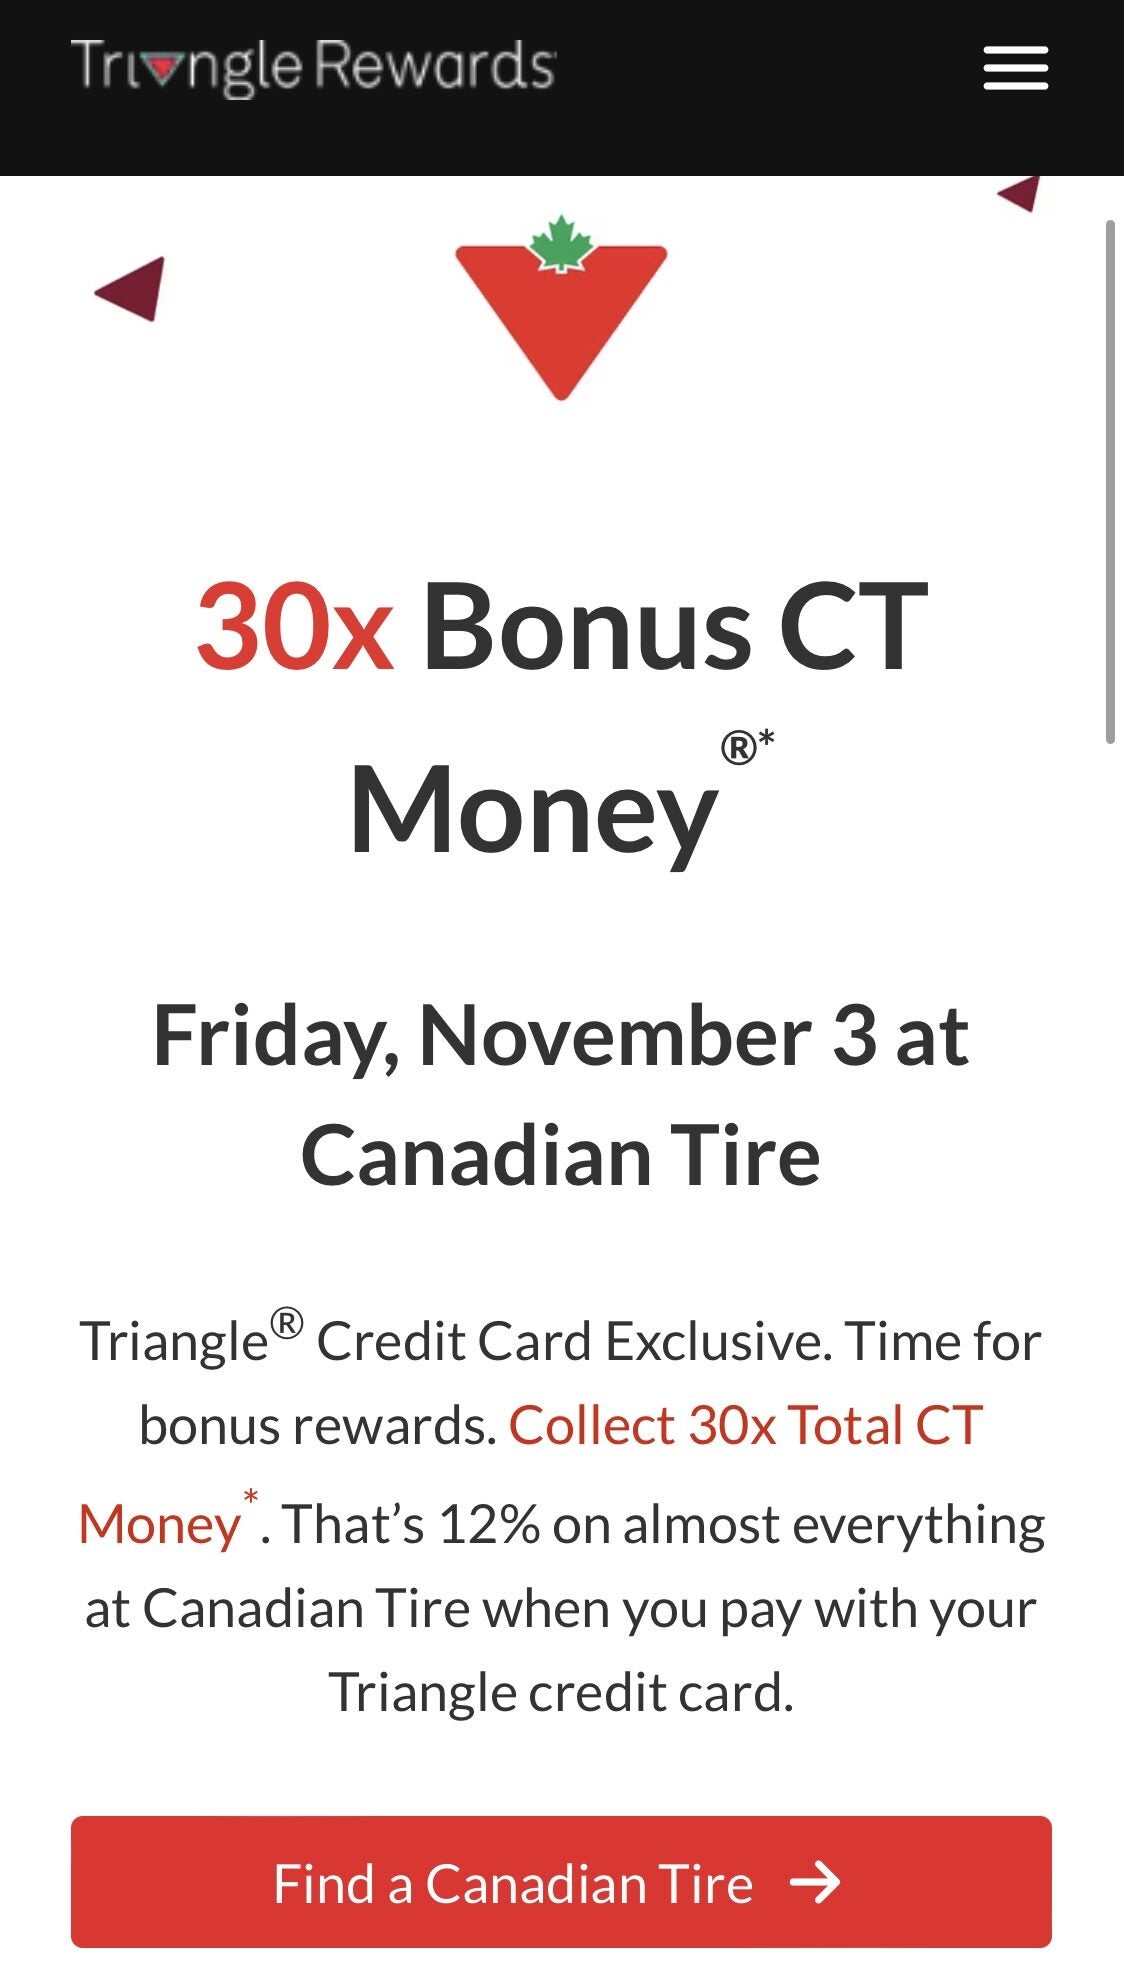 Canadian Tire] [Triangle Credit Card] HOTTER Than October Bonus